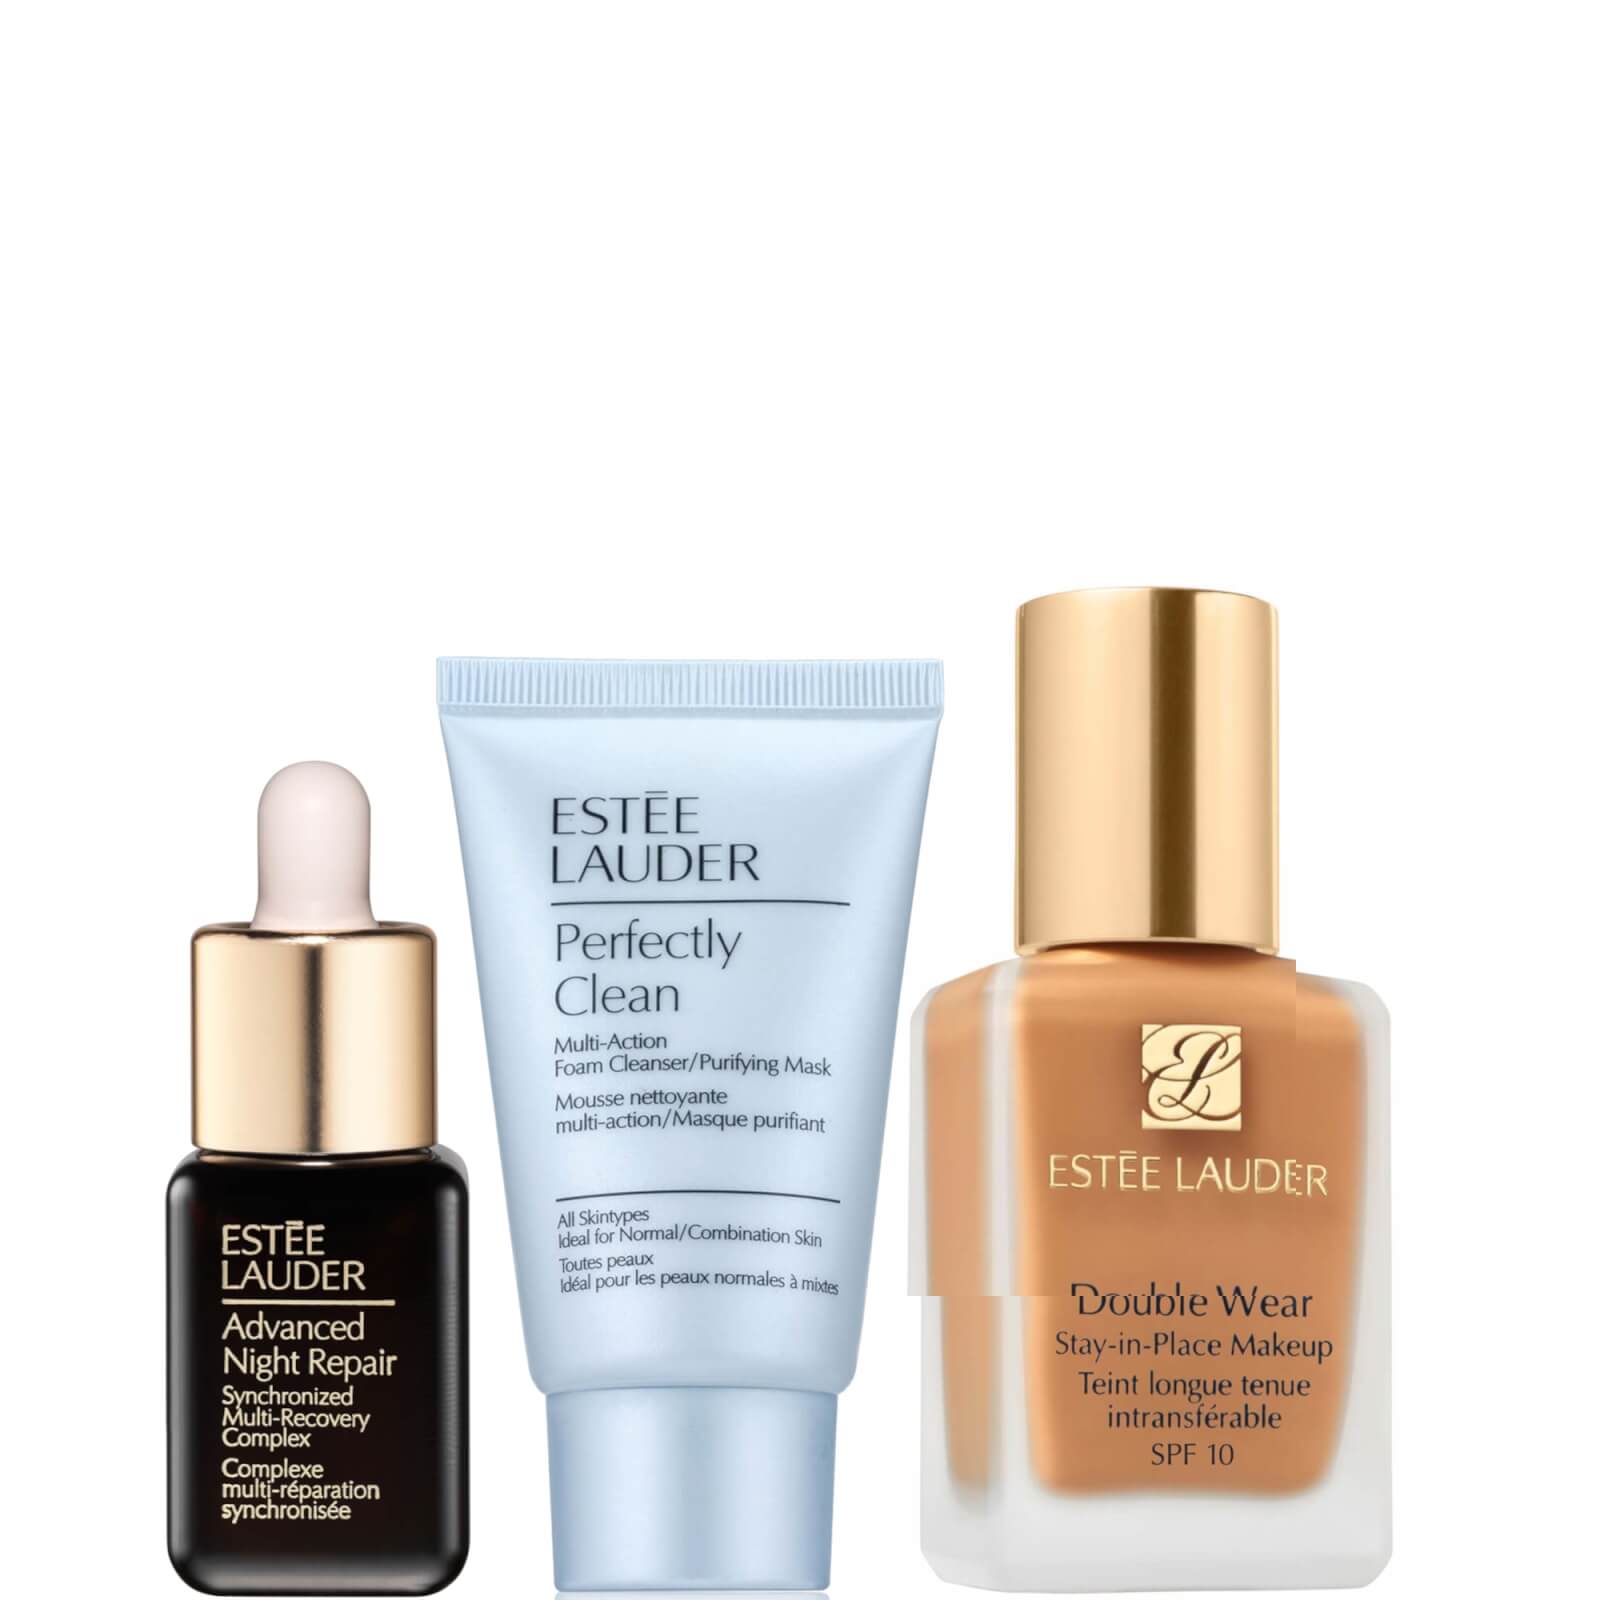 Estée Lauder My Shade My Story Bundle (Various Shades) (Worth 85€) - 2W1.5 Natural Suede